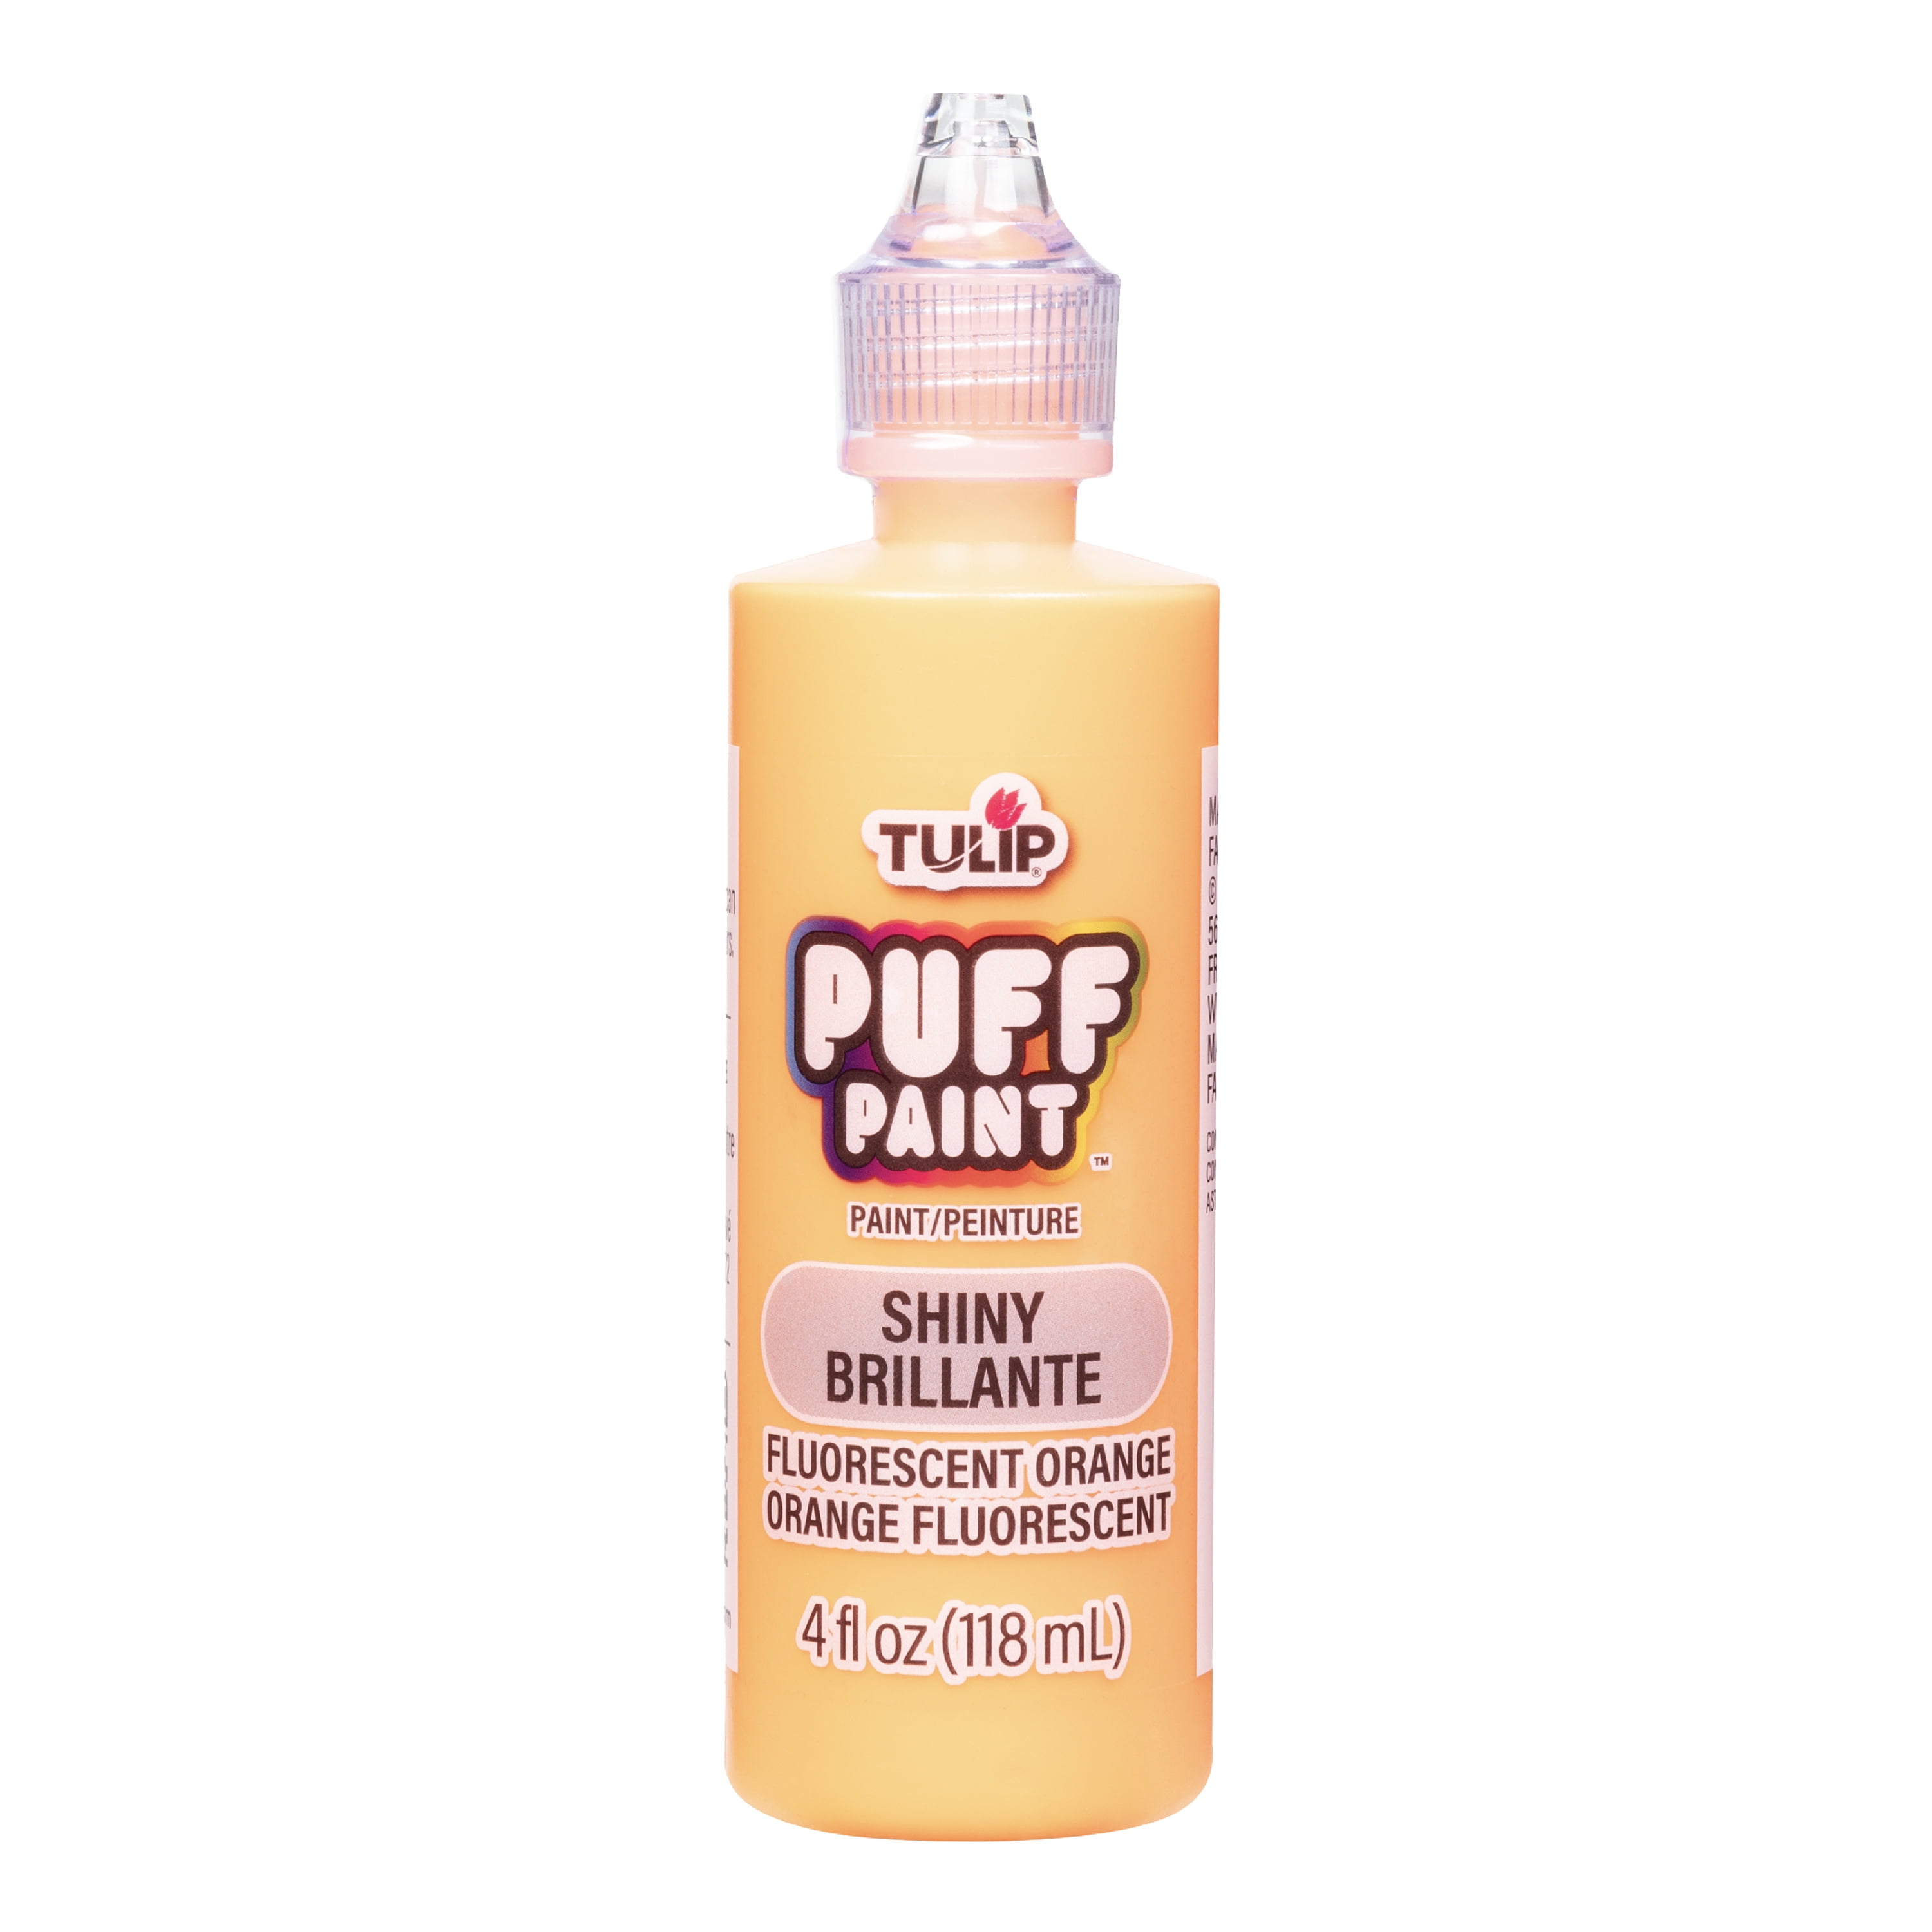 How To Activate Puffy & Glow Dimensional Fabric Paint